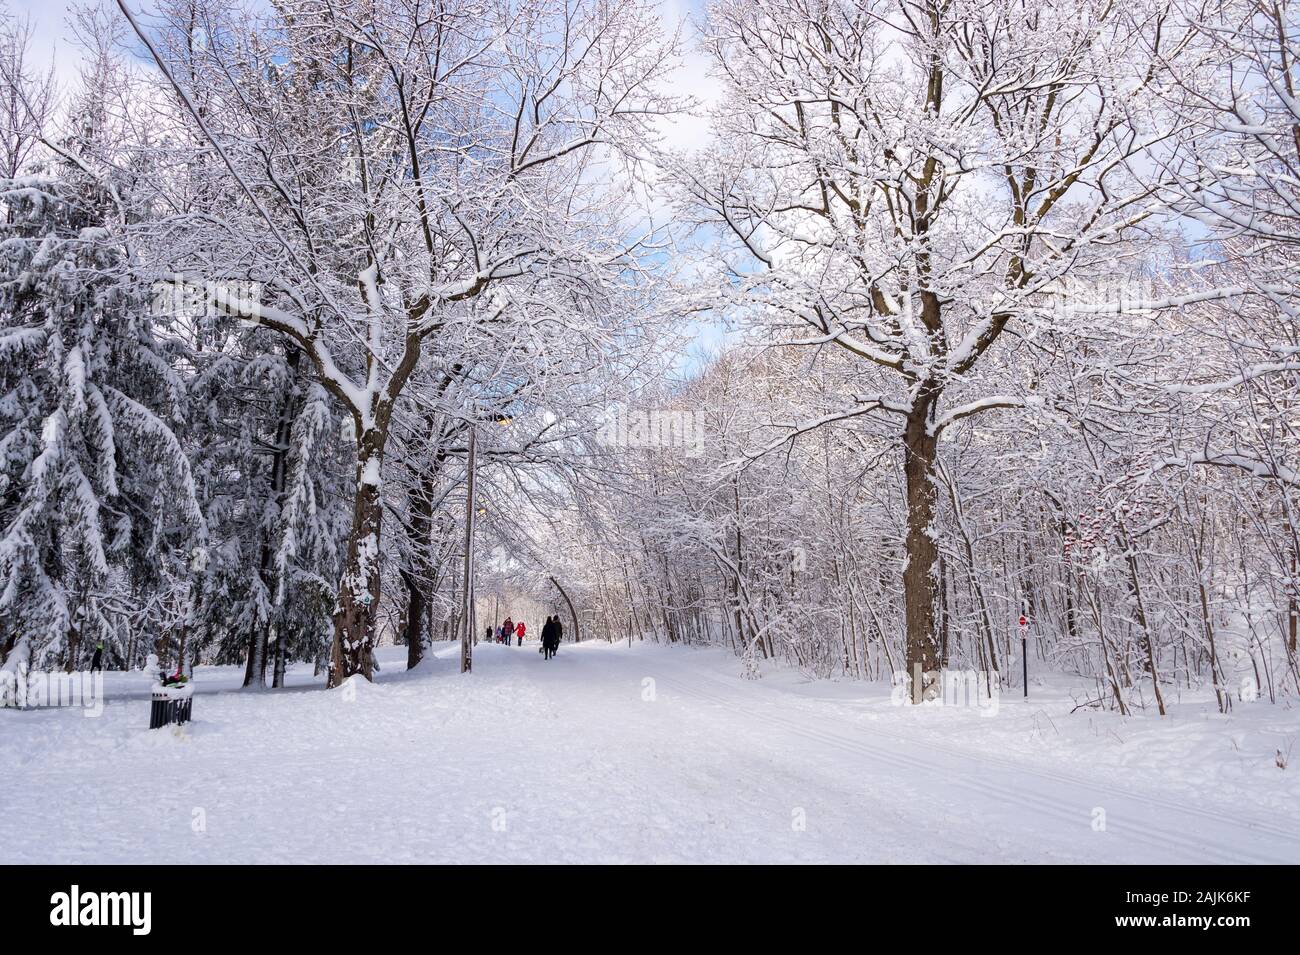 Montreal, CA - 01 January 2020: People walking on a snowy trail in Montreal's Mount Royal Park (Parc Du Mont-Royal) after snow storm. Stock Photo